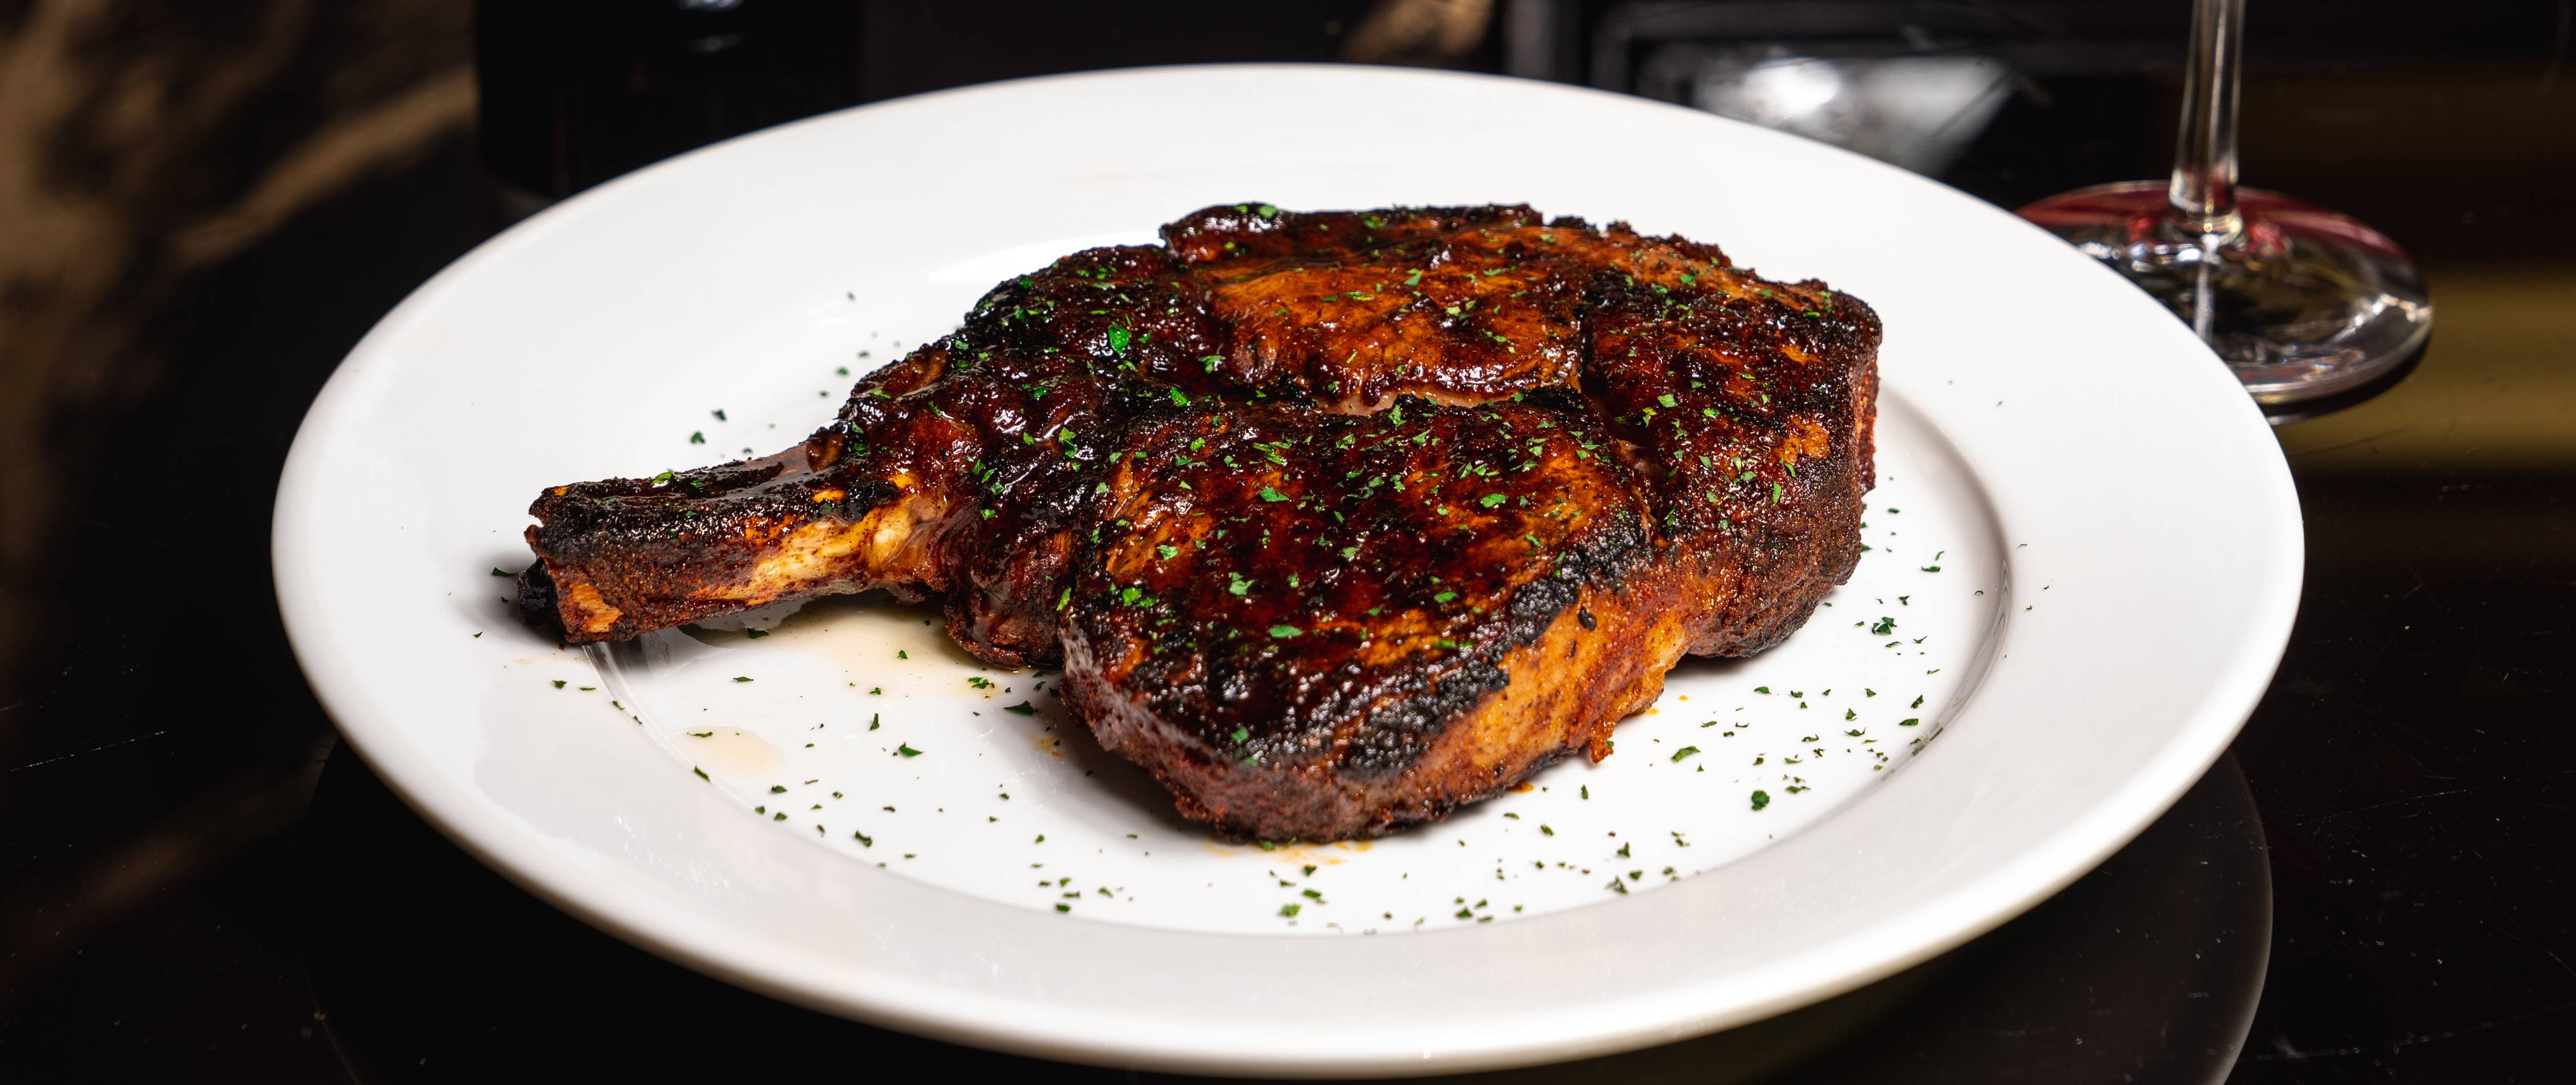 Where To Find The Best Steak In Houston